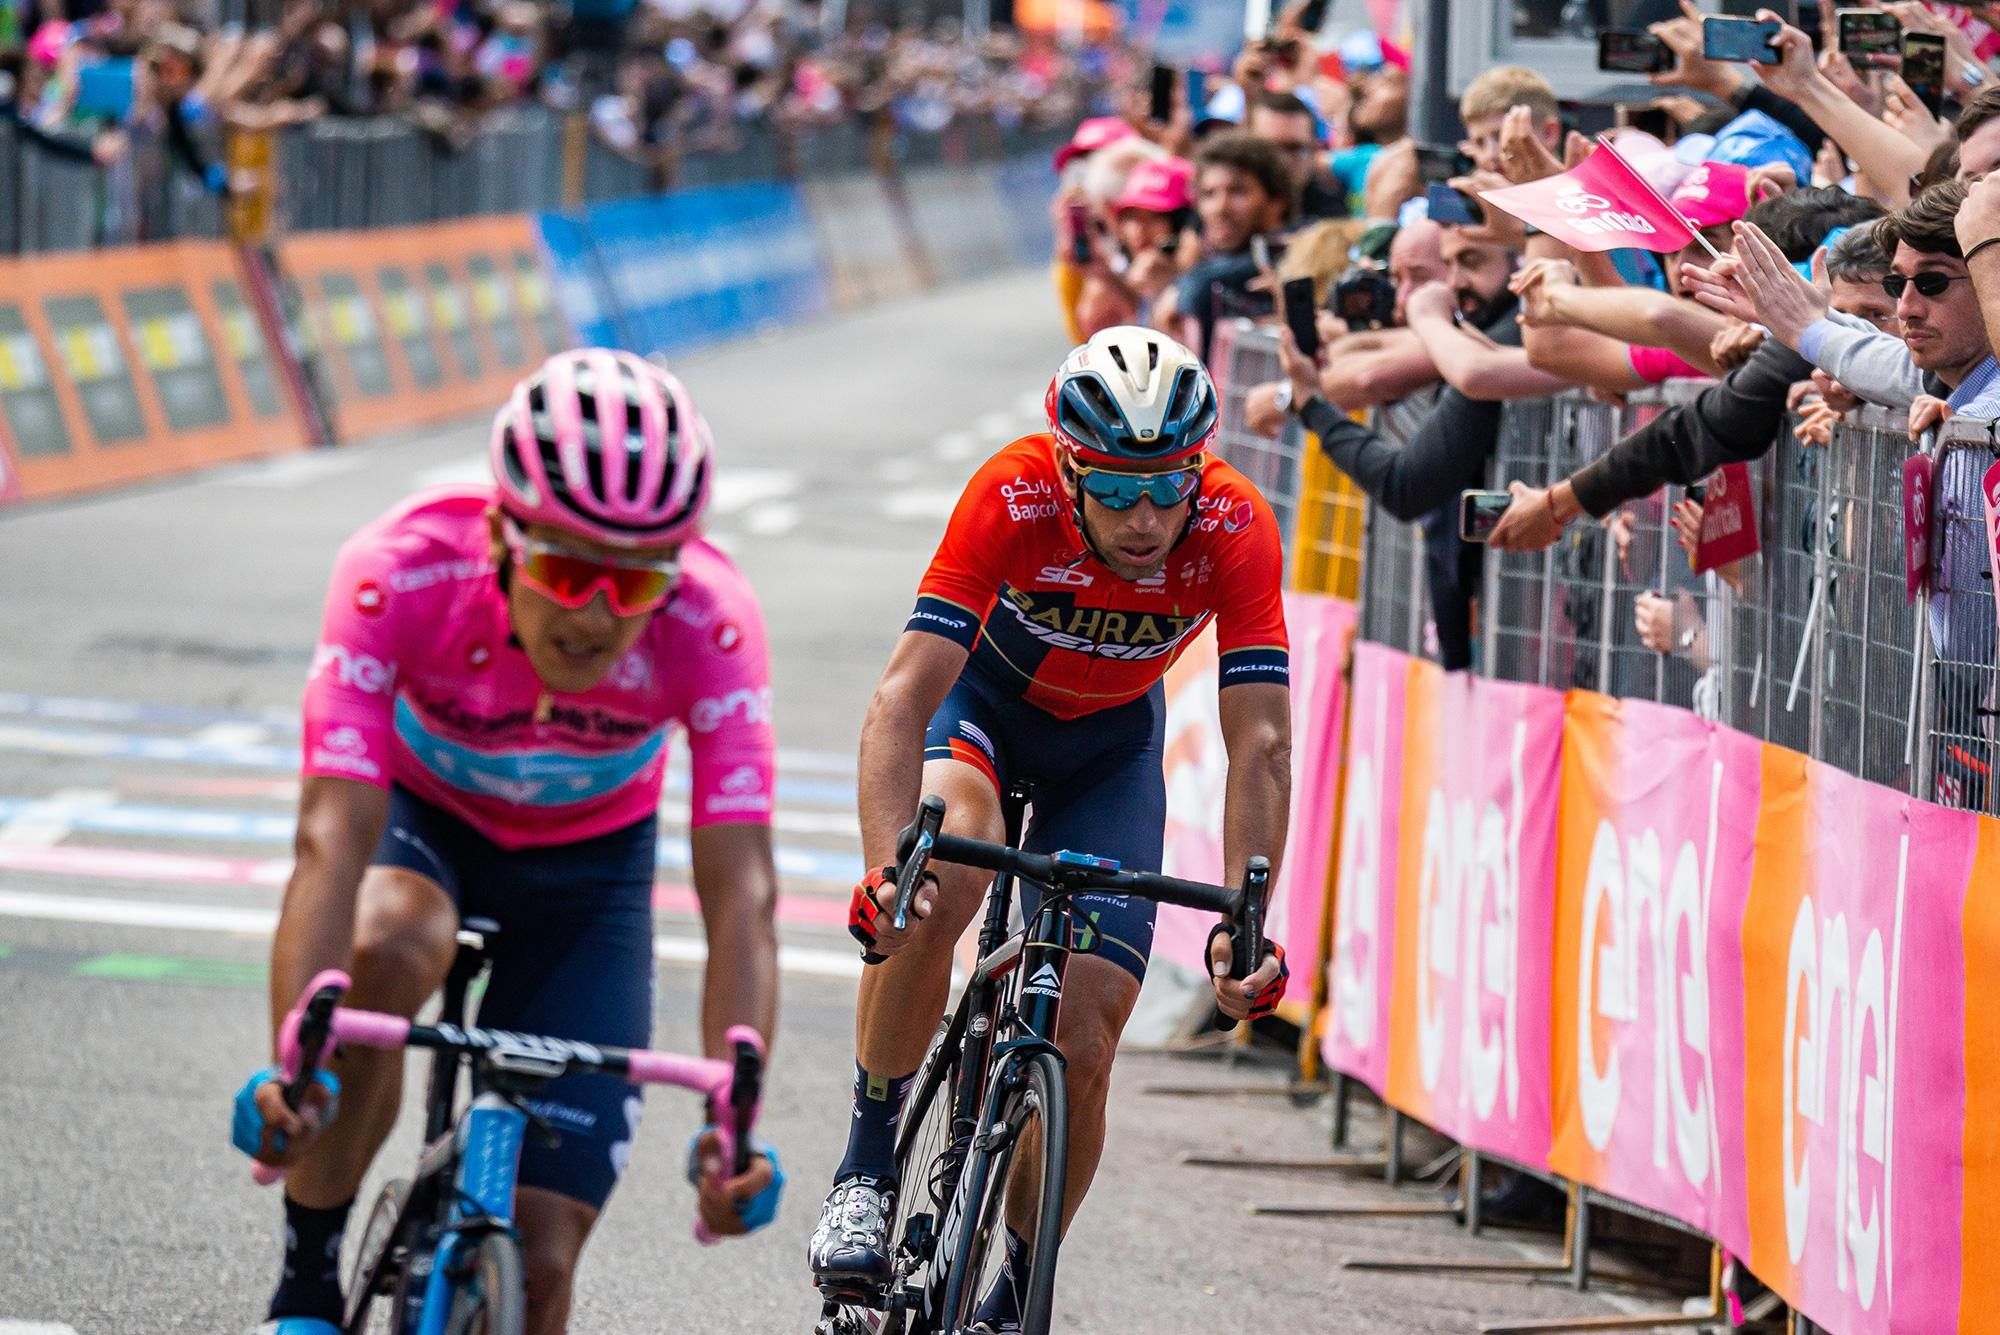 Recent winners at the Giro d’Italia with Nibali on the heels of Carapaz